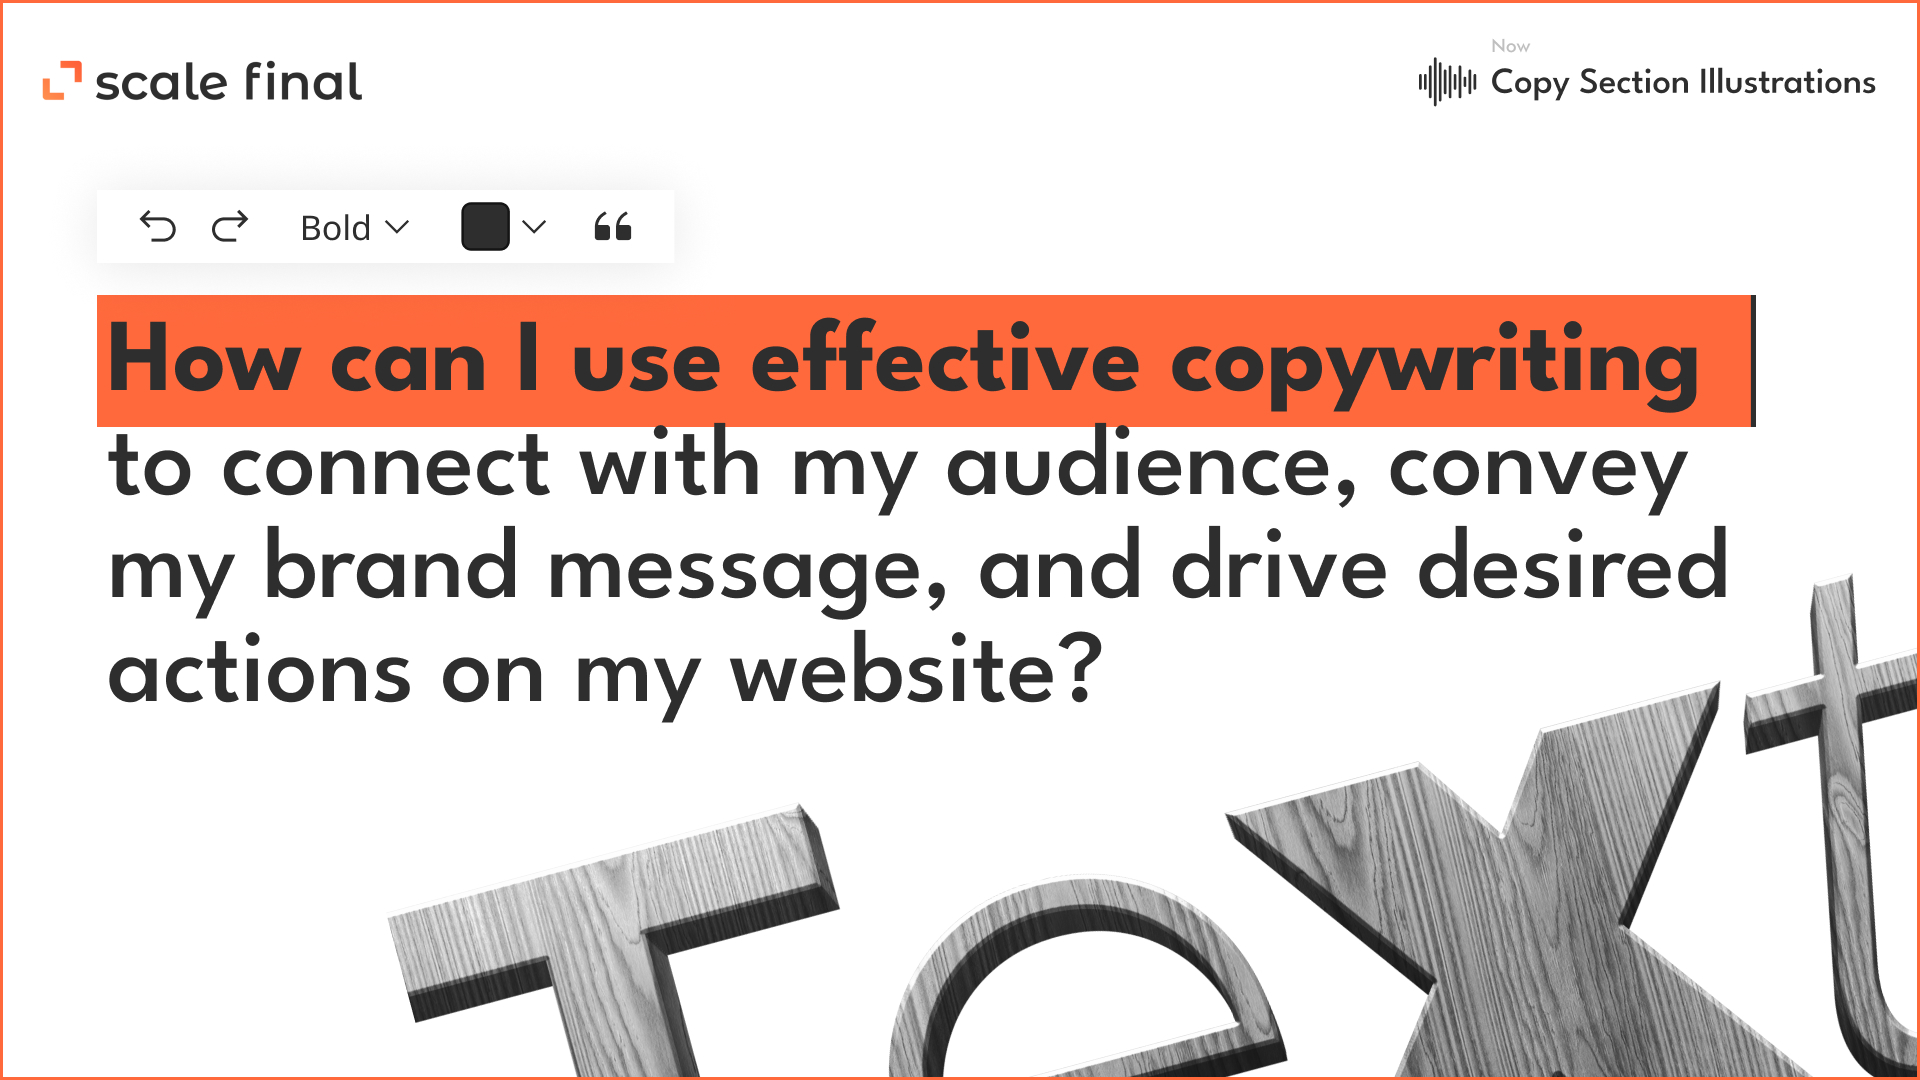 How can I use effective copywriting to connect with my audience, convey my brand message, and drive desired actions on my website?